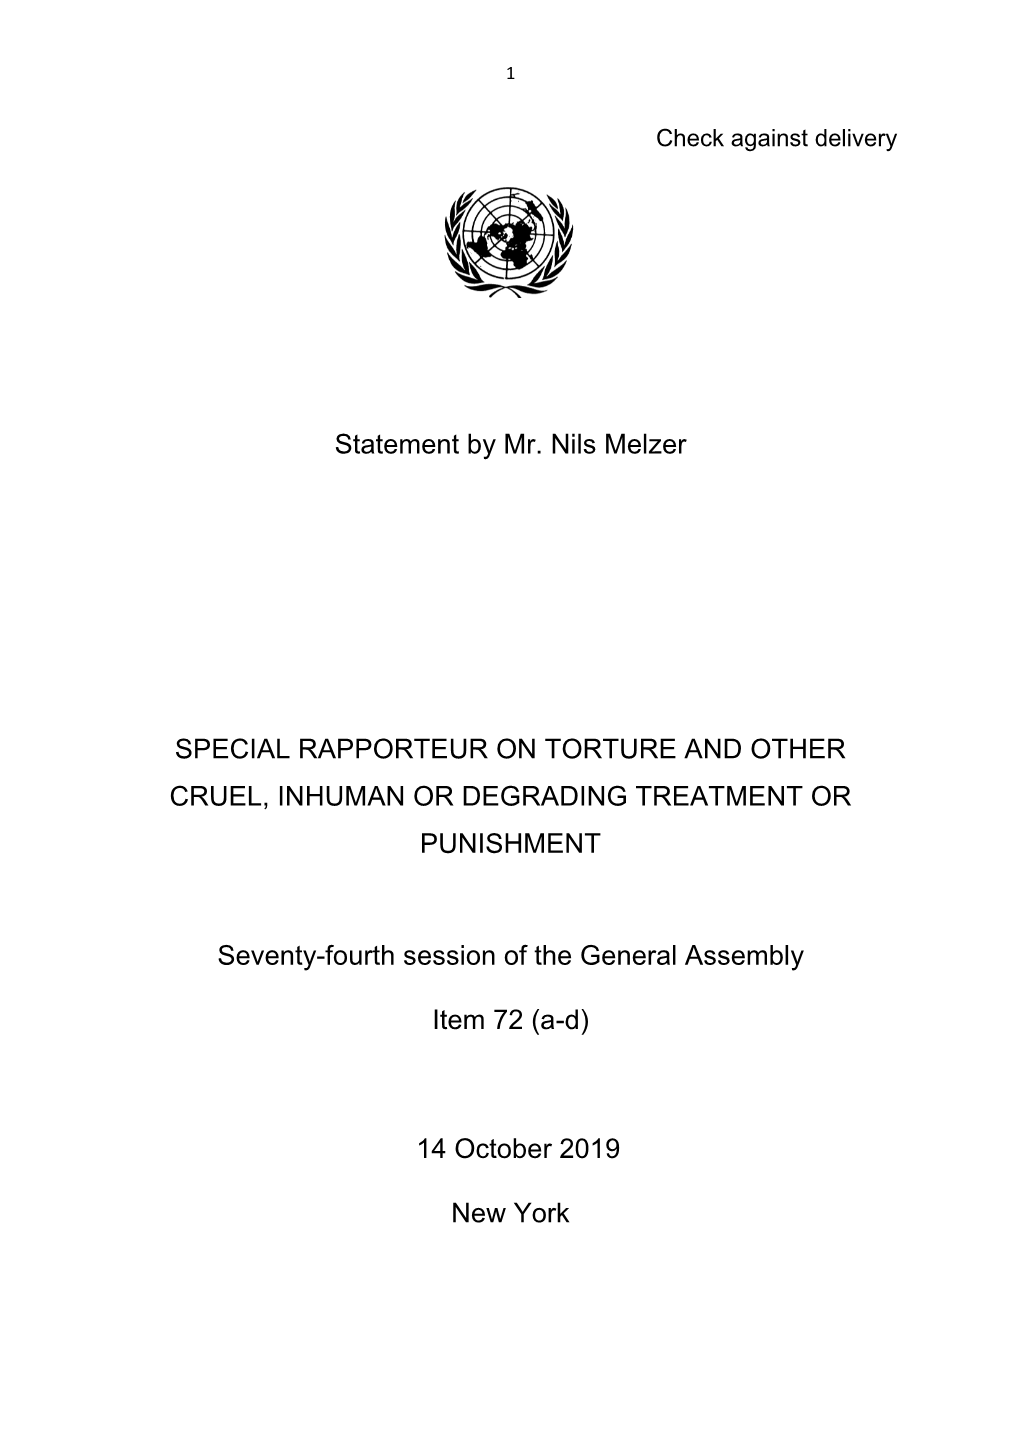 Statement by Mr. Nils Melzer SPECIAL RAPPORTEUR on TORTURE and OTHER CRUEL, INHUMAN OR DEGRADING TREATMENT OR PUNISHMENT Seven